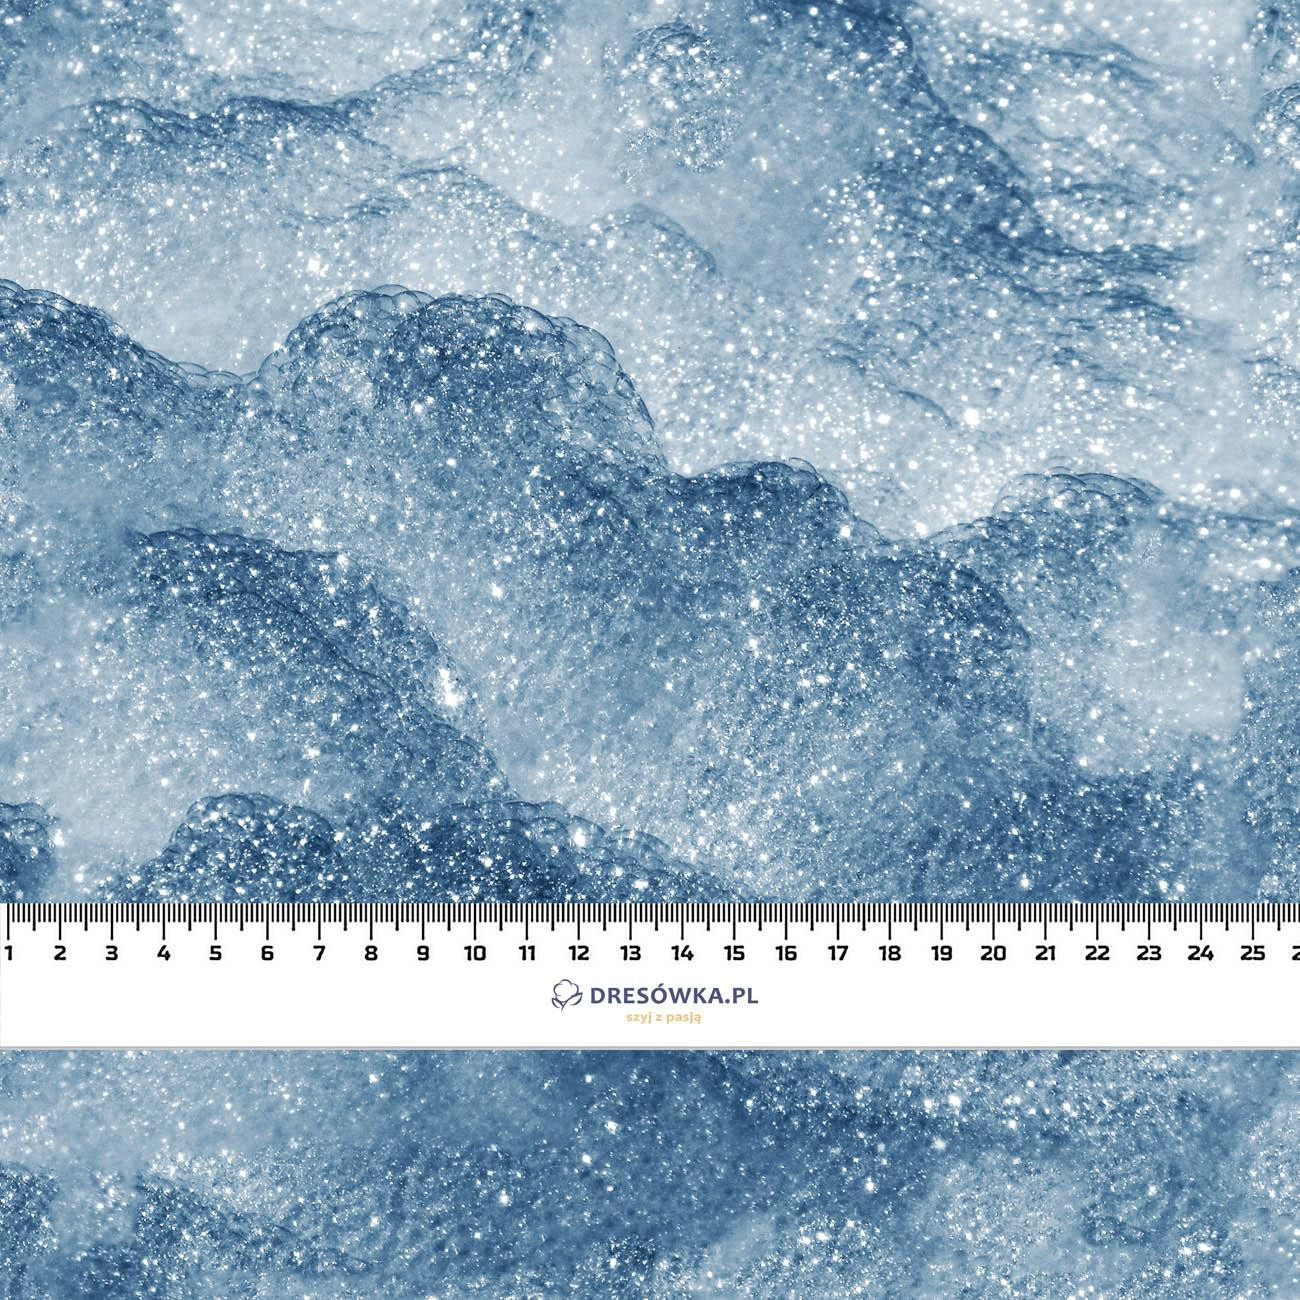 SNOW / sea blue (PAINTED ON GLASS) - light brushed knitwear